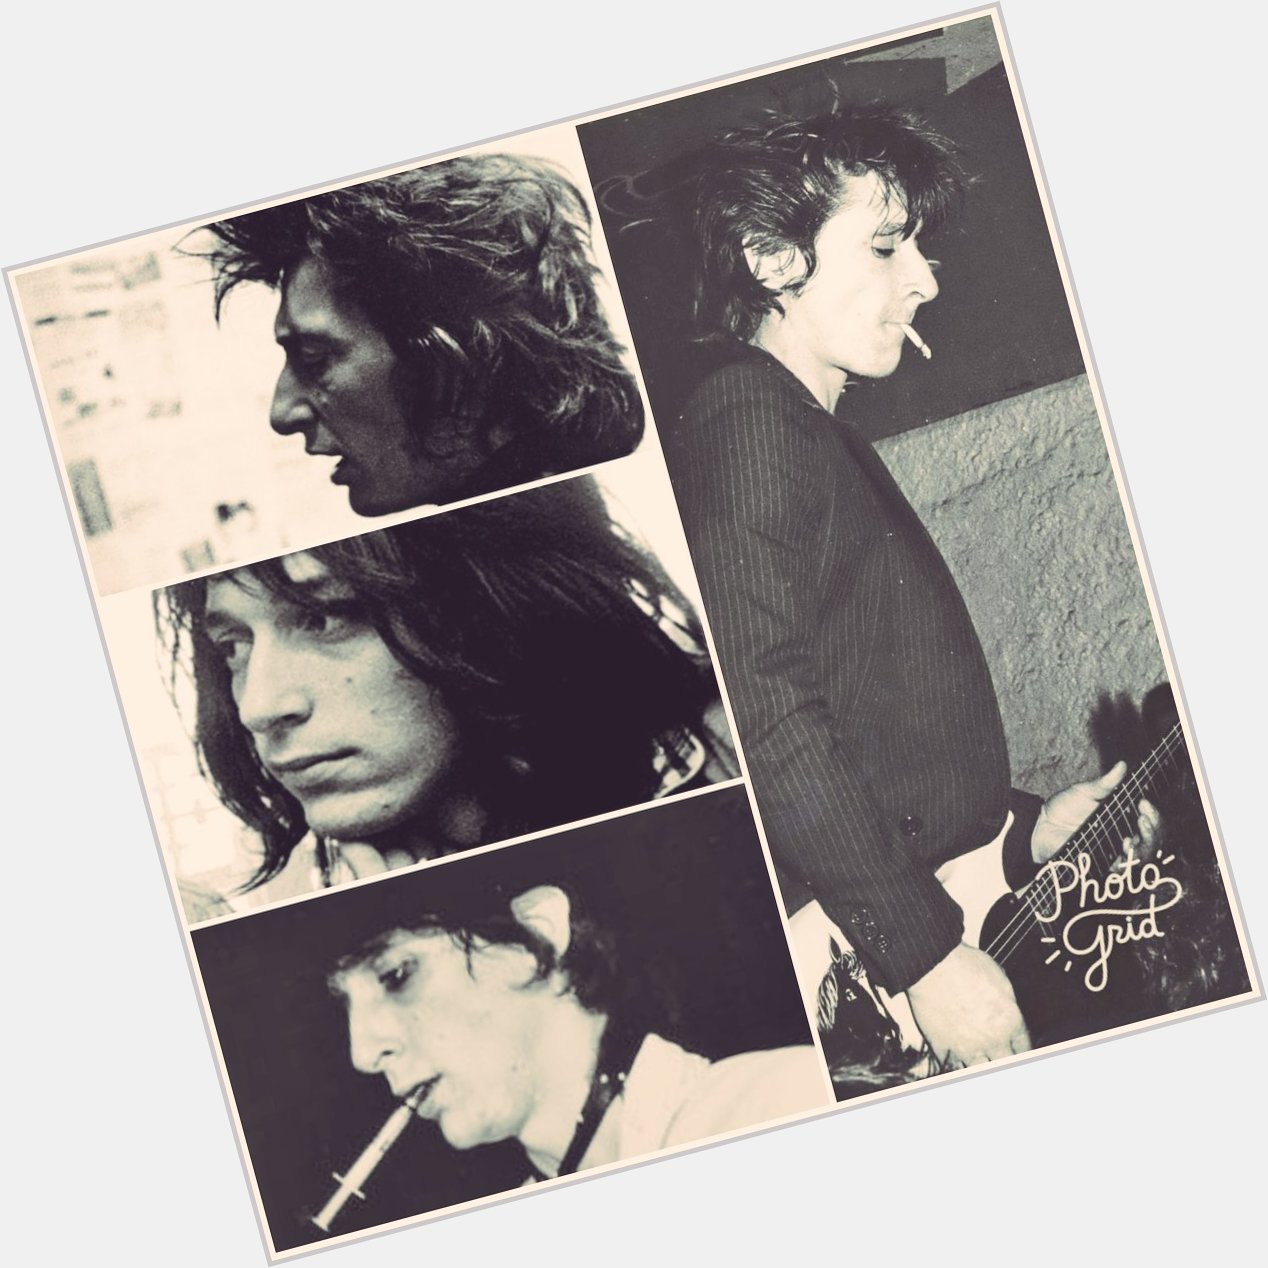          SO ALONE YOU CAN T PUT YOUR 
ARMS ROUND A MEMORY HAPPY BIRTHDAY
JOHNNY THUNDERS 